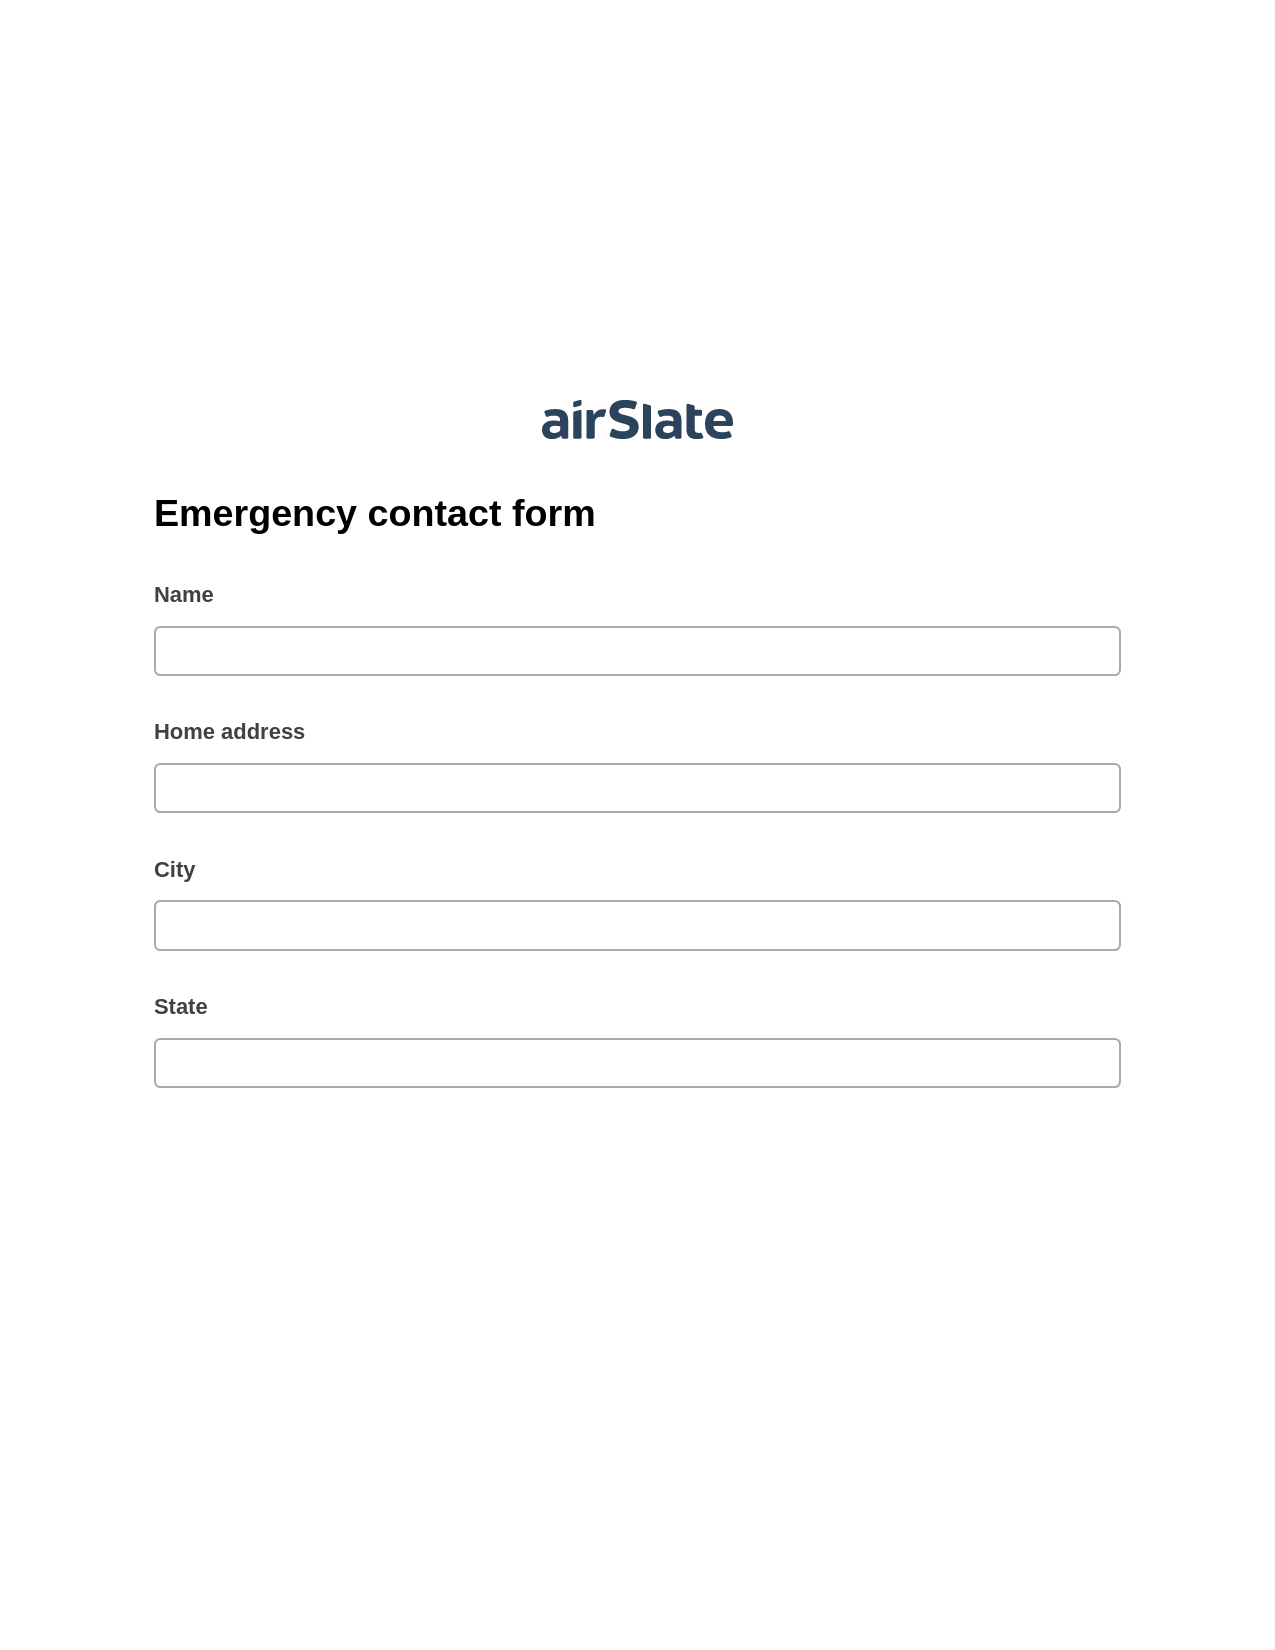 Multirole Emergency contact form Pre-fill from Google Sheet Dropdown Options Bot, Add Tags to Slate Bot, Export to NetSuite Record Bot